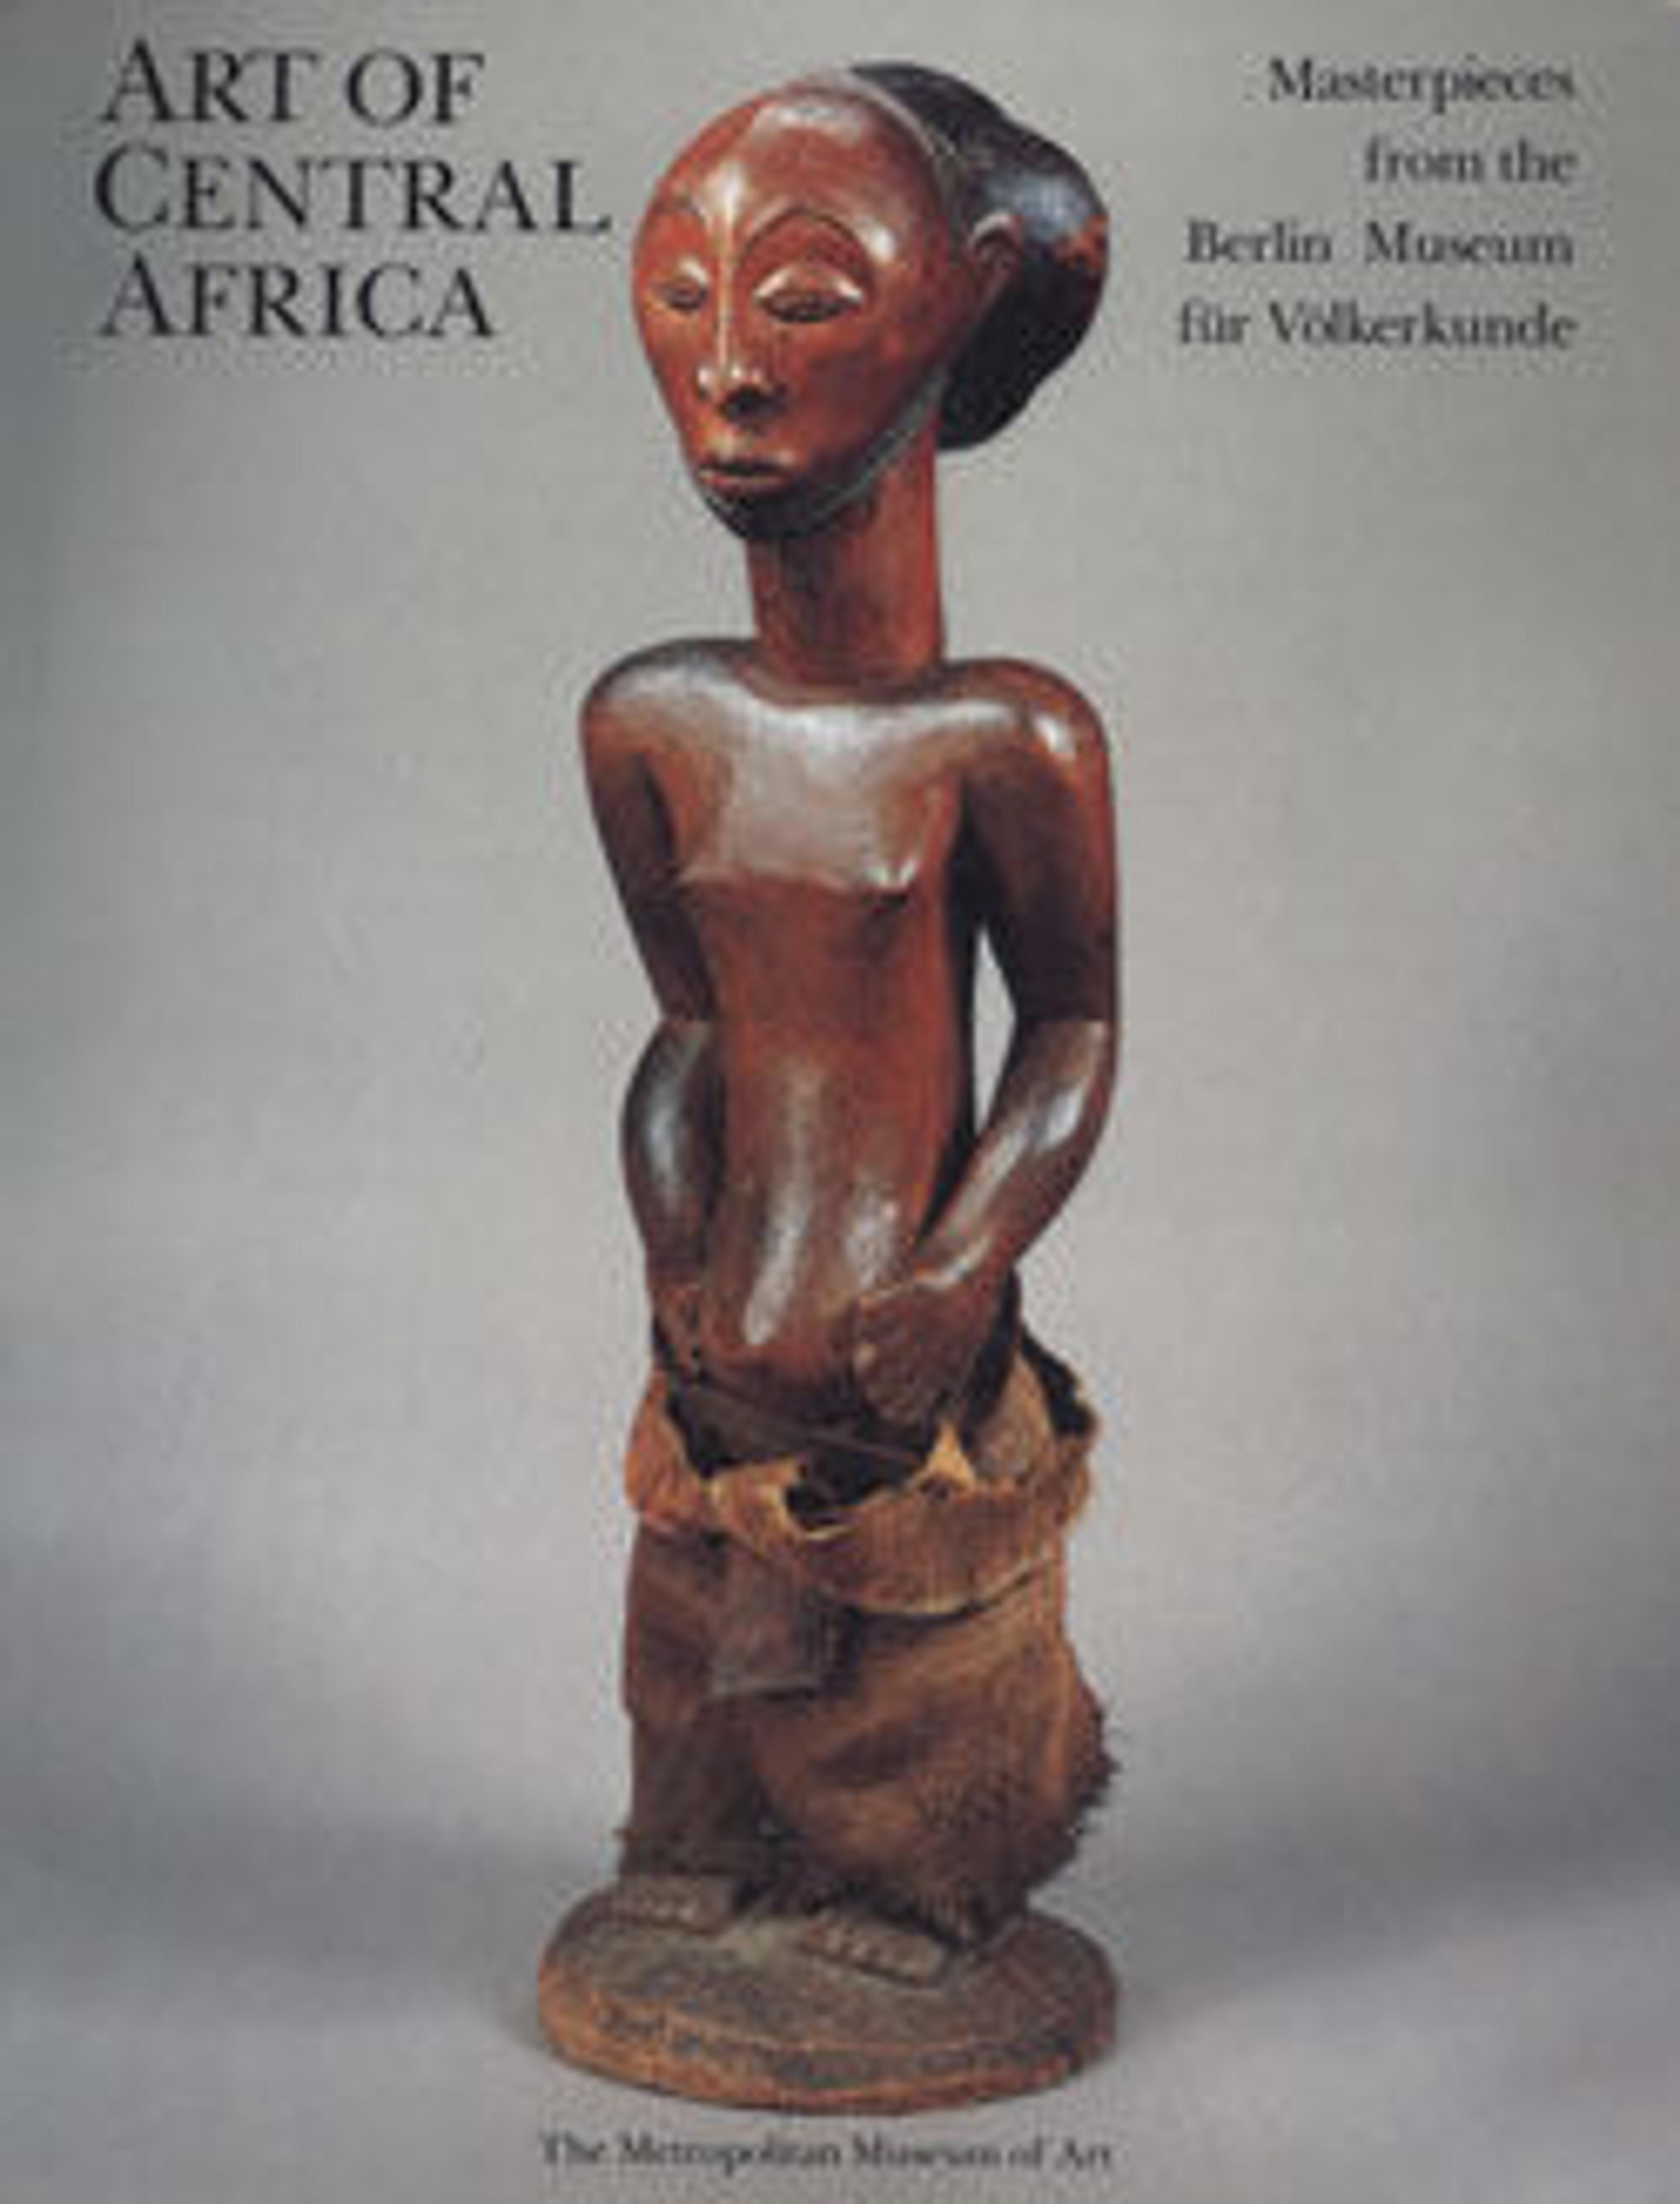 The Art of Central Africa: Masterpieces from the Berlin Museum fur Volkerkunde